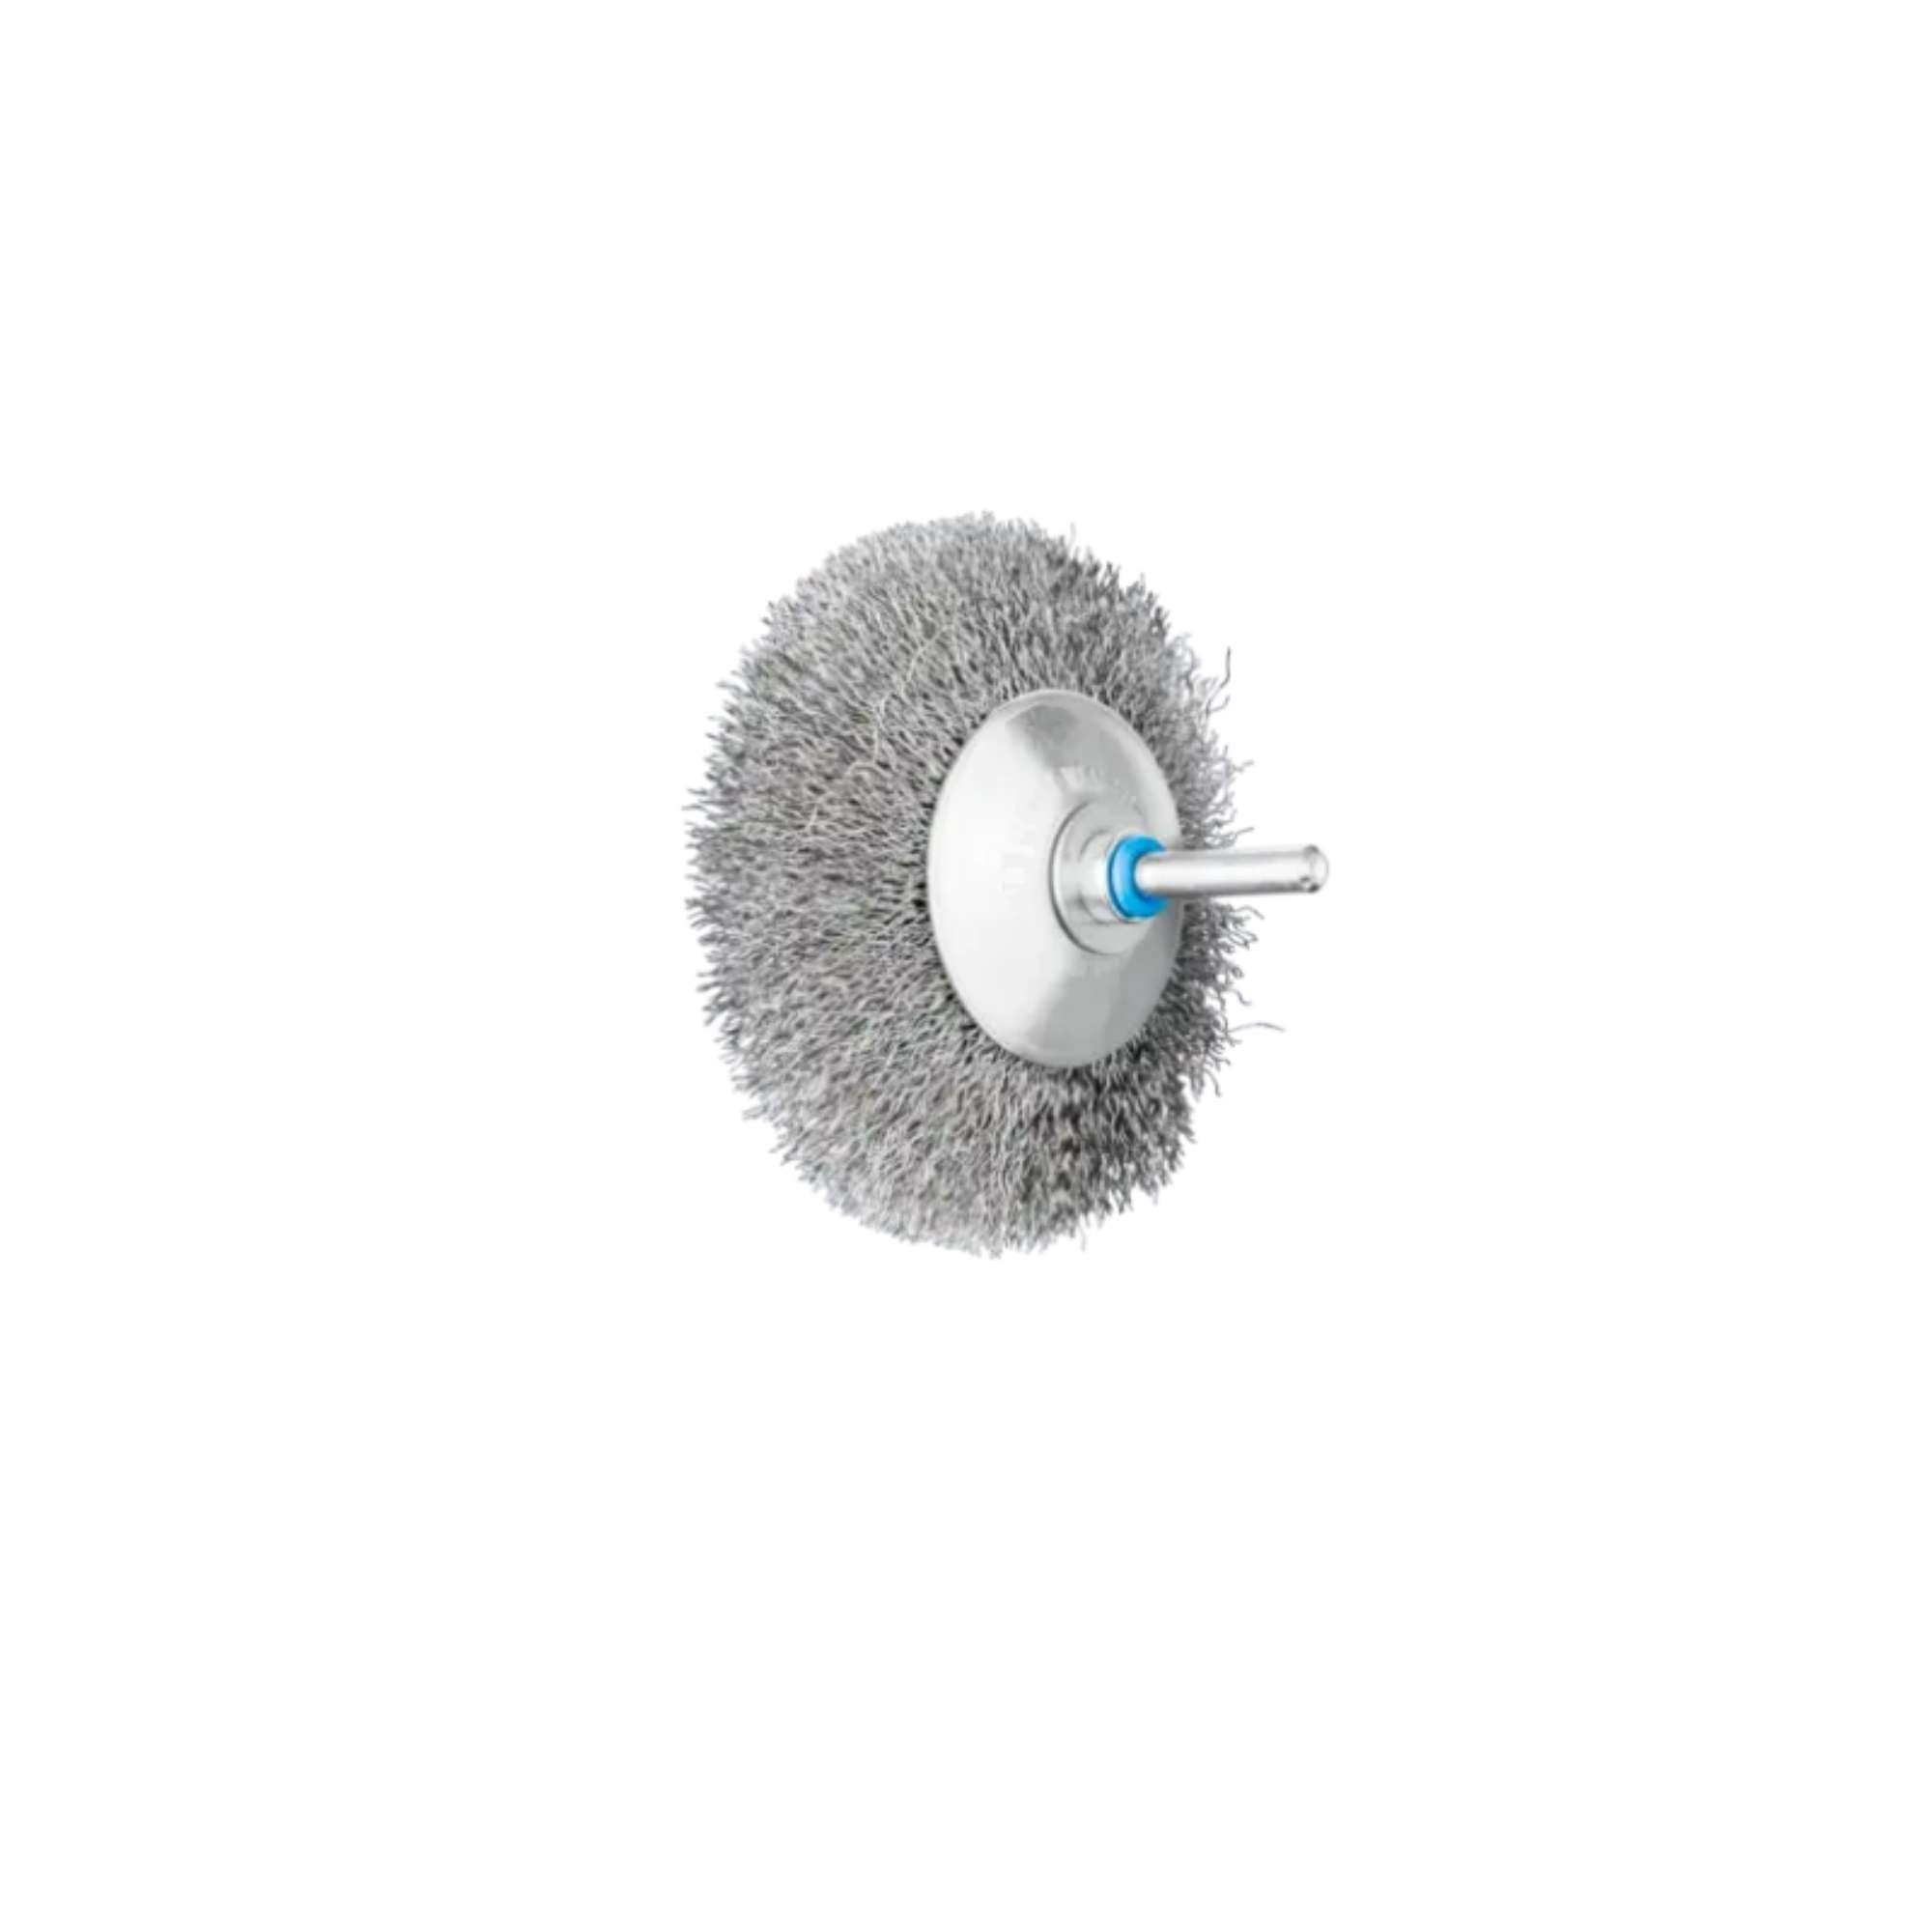 Conical brush with wire 9510/6 Inox 0.30 - Pferd 43312503